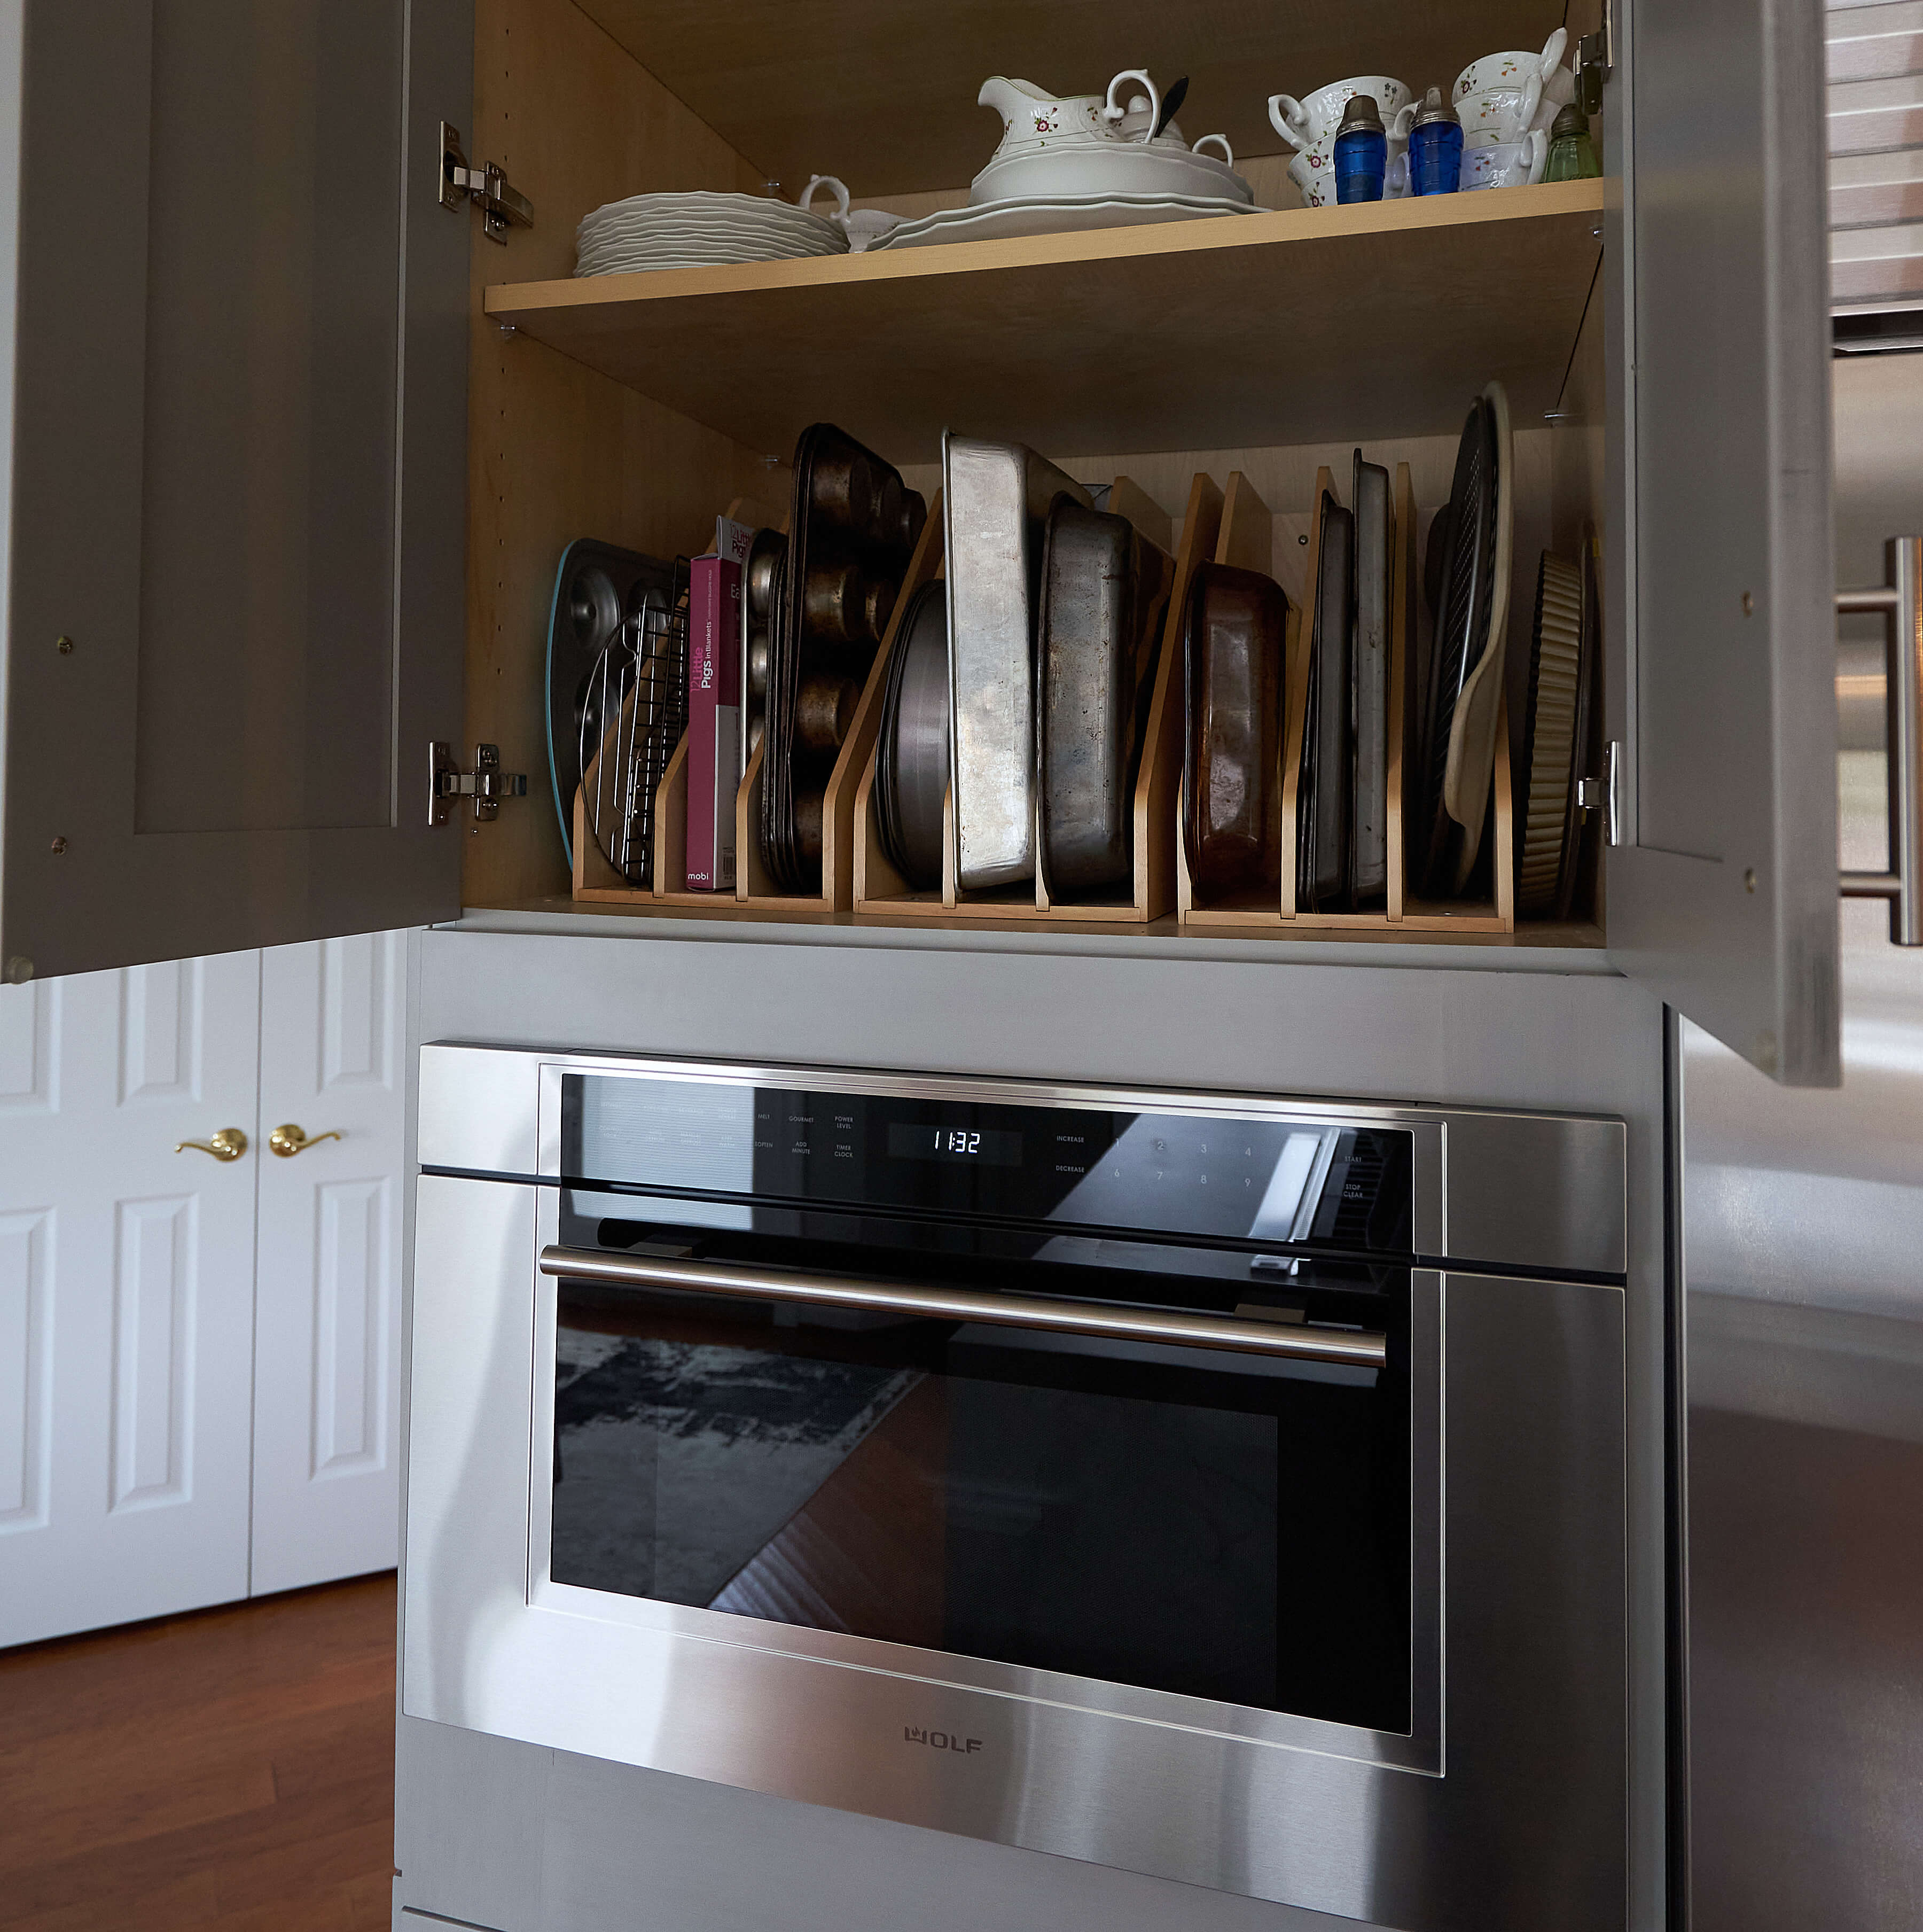 A cabinet above a wall oven with several tray dividers for organizing baking sheets, pizza pans, muffin tins, cutting boards, and trays.